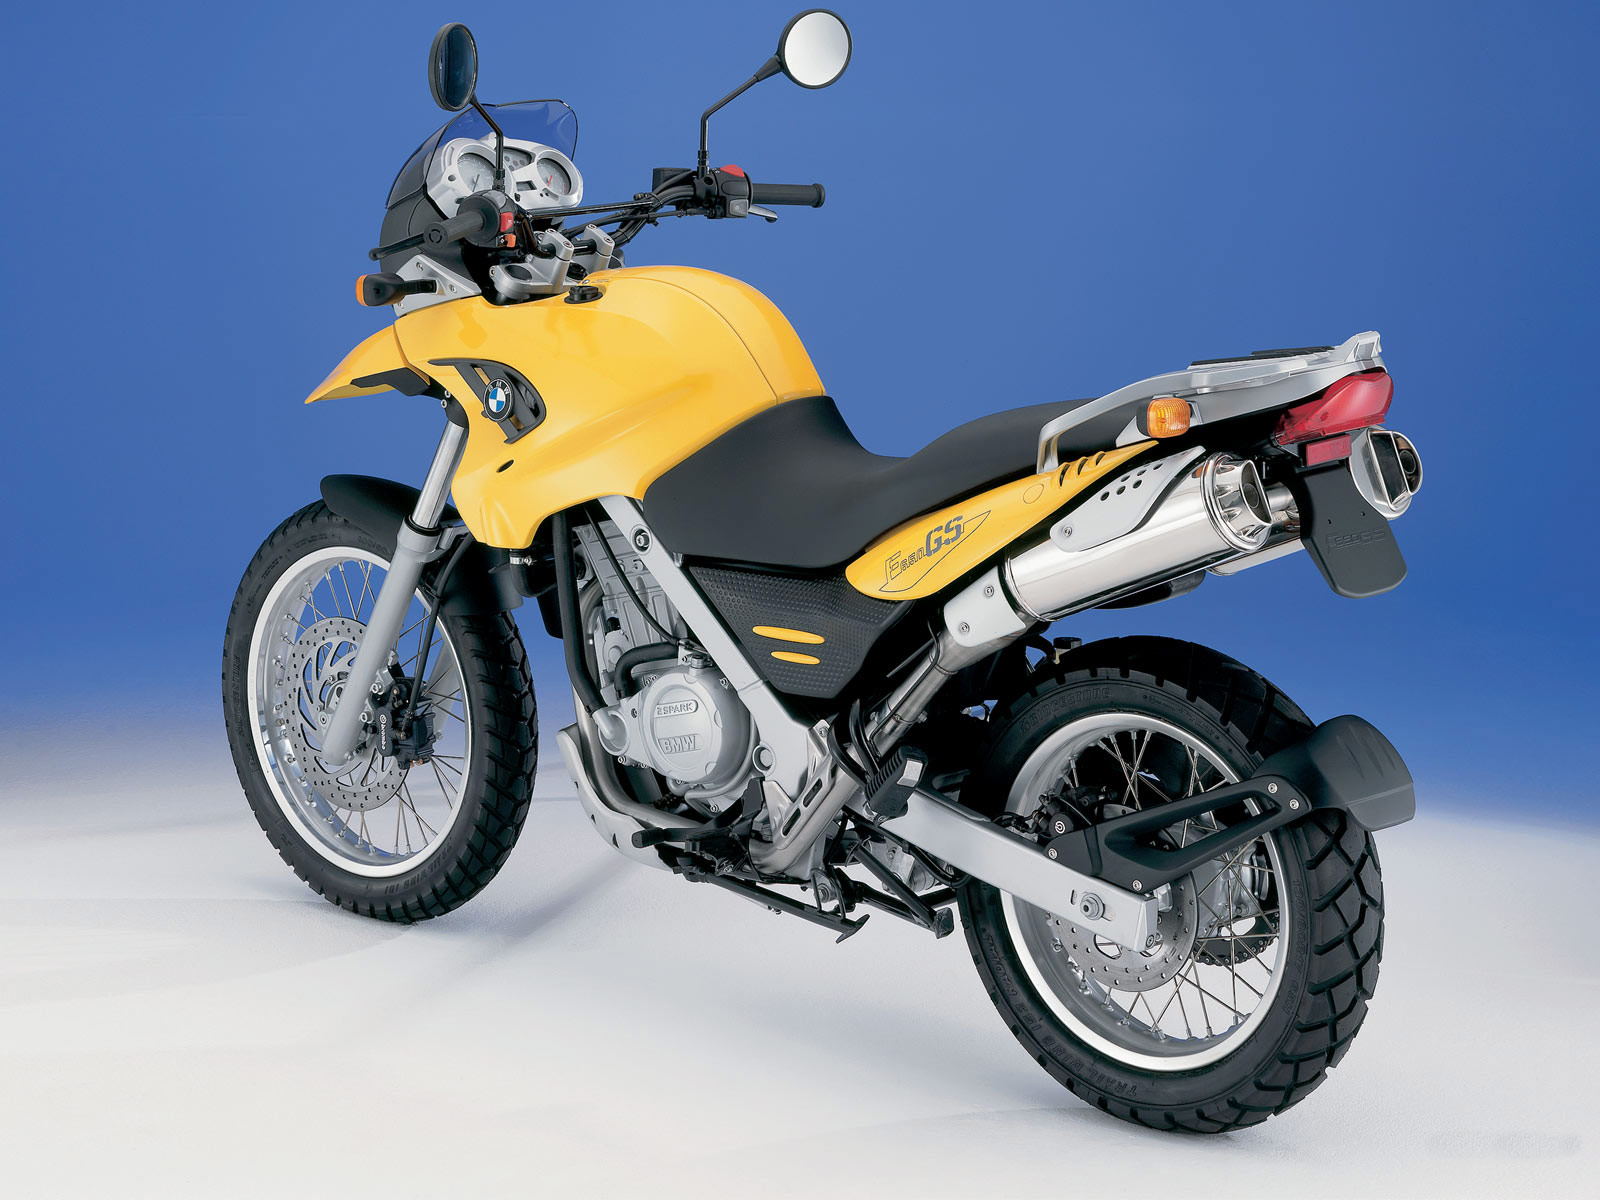 2004 BMW F 650 GS motorcycle wallpaper. Accident lawyers info